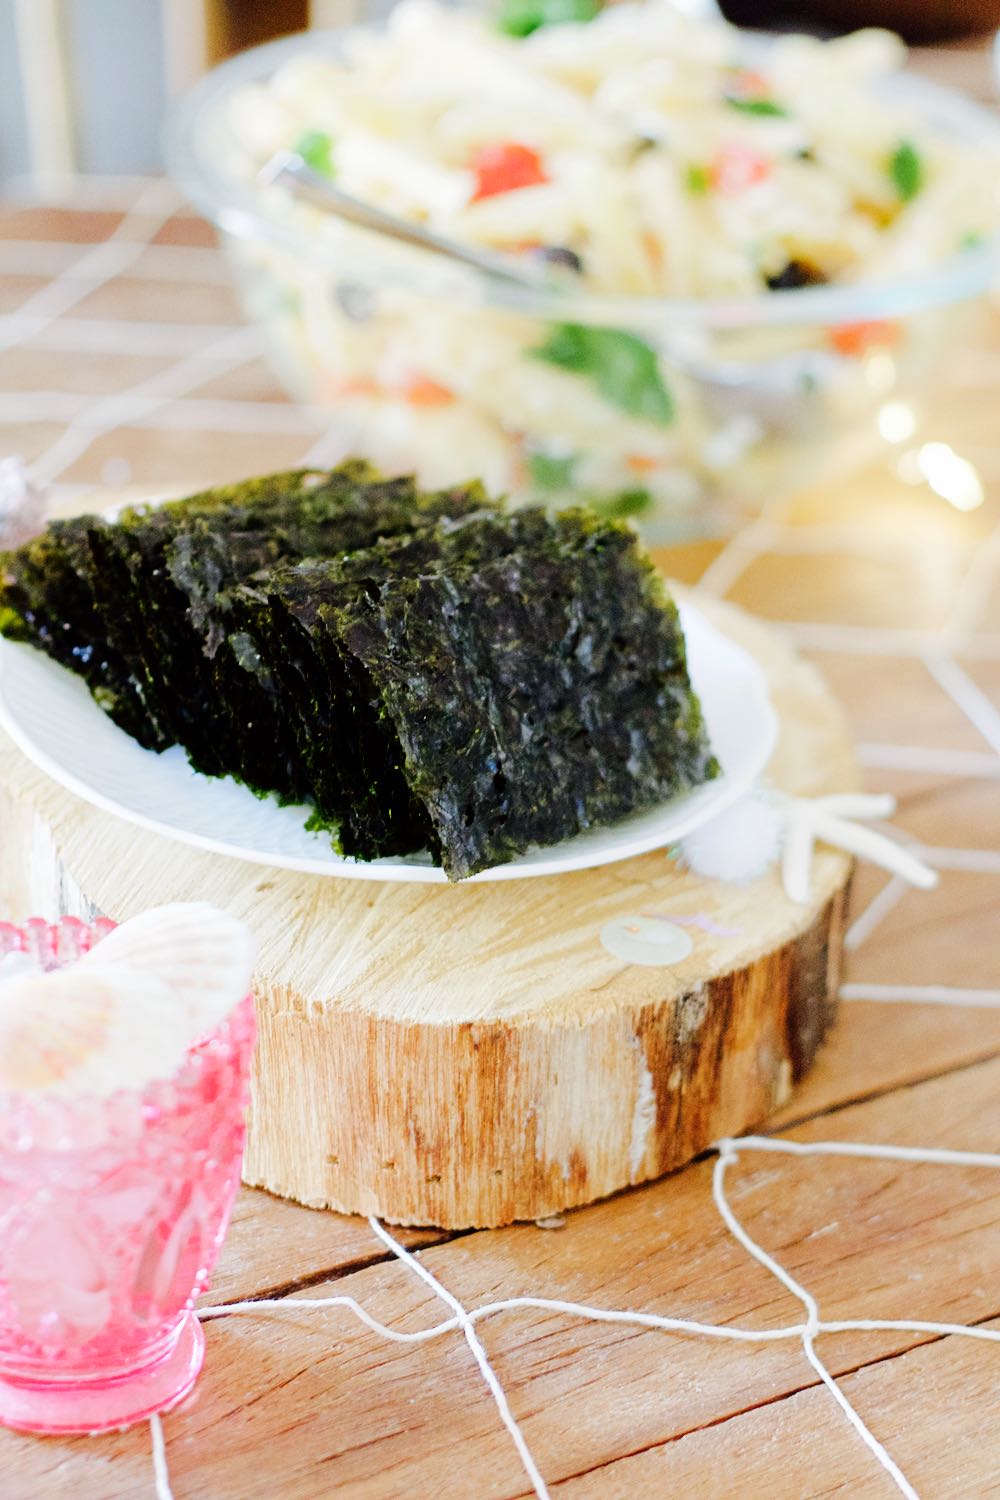 Seaweed served as an appetizer at a party